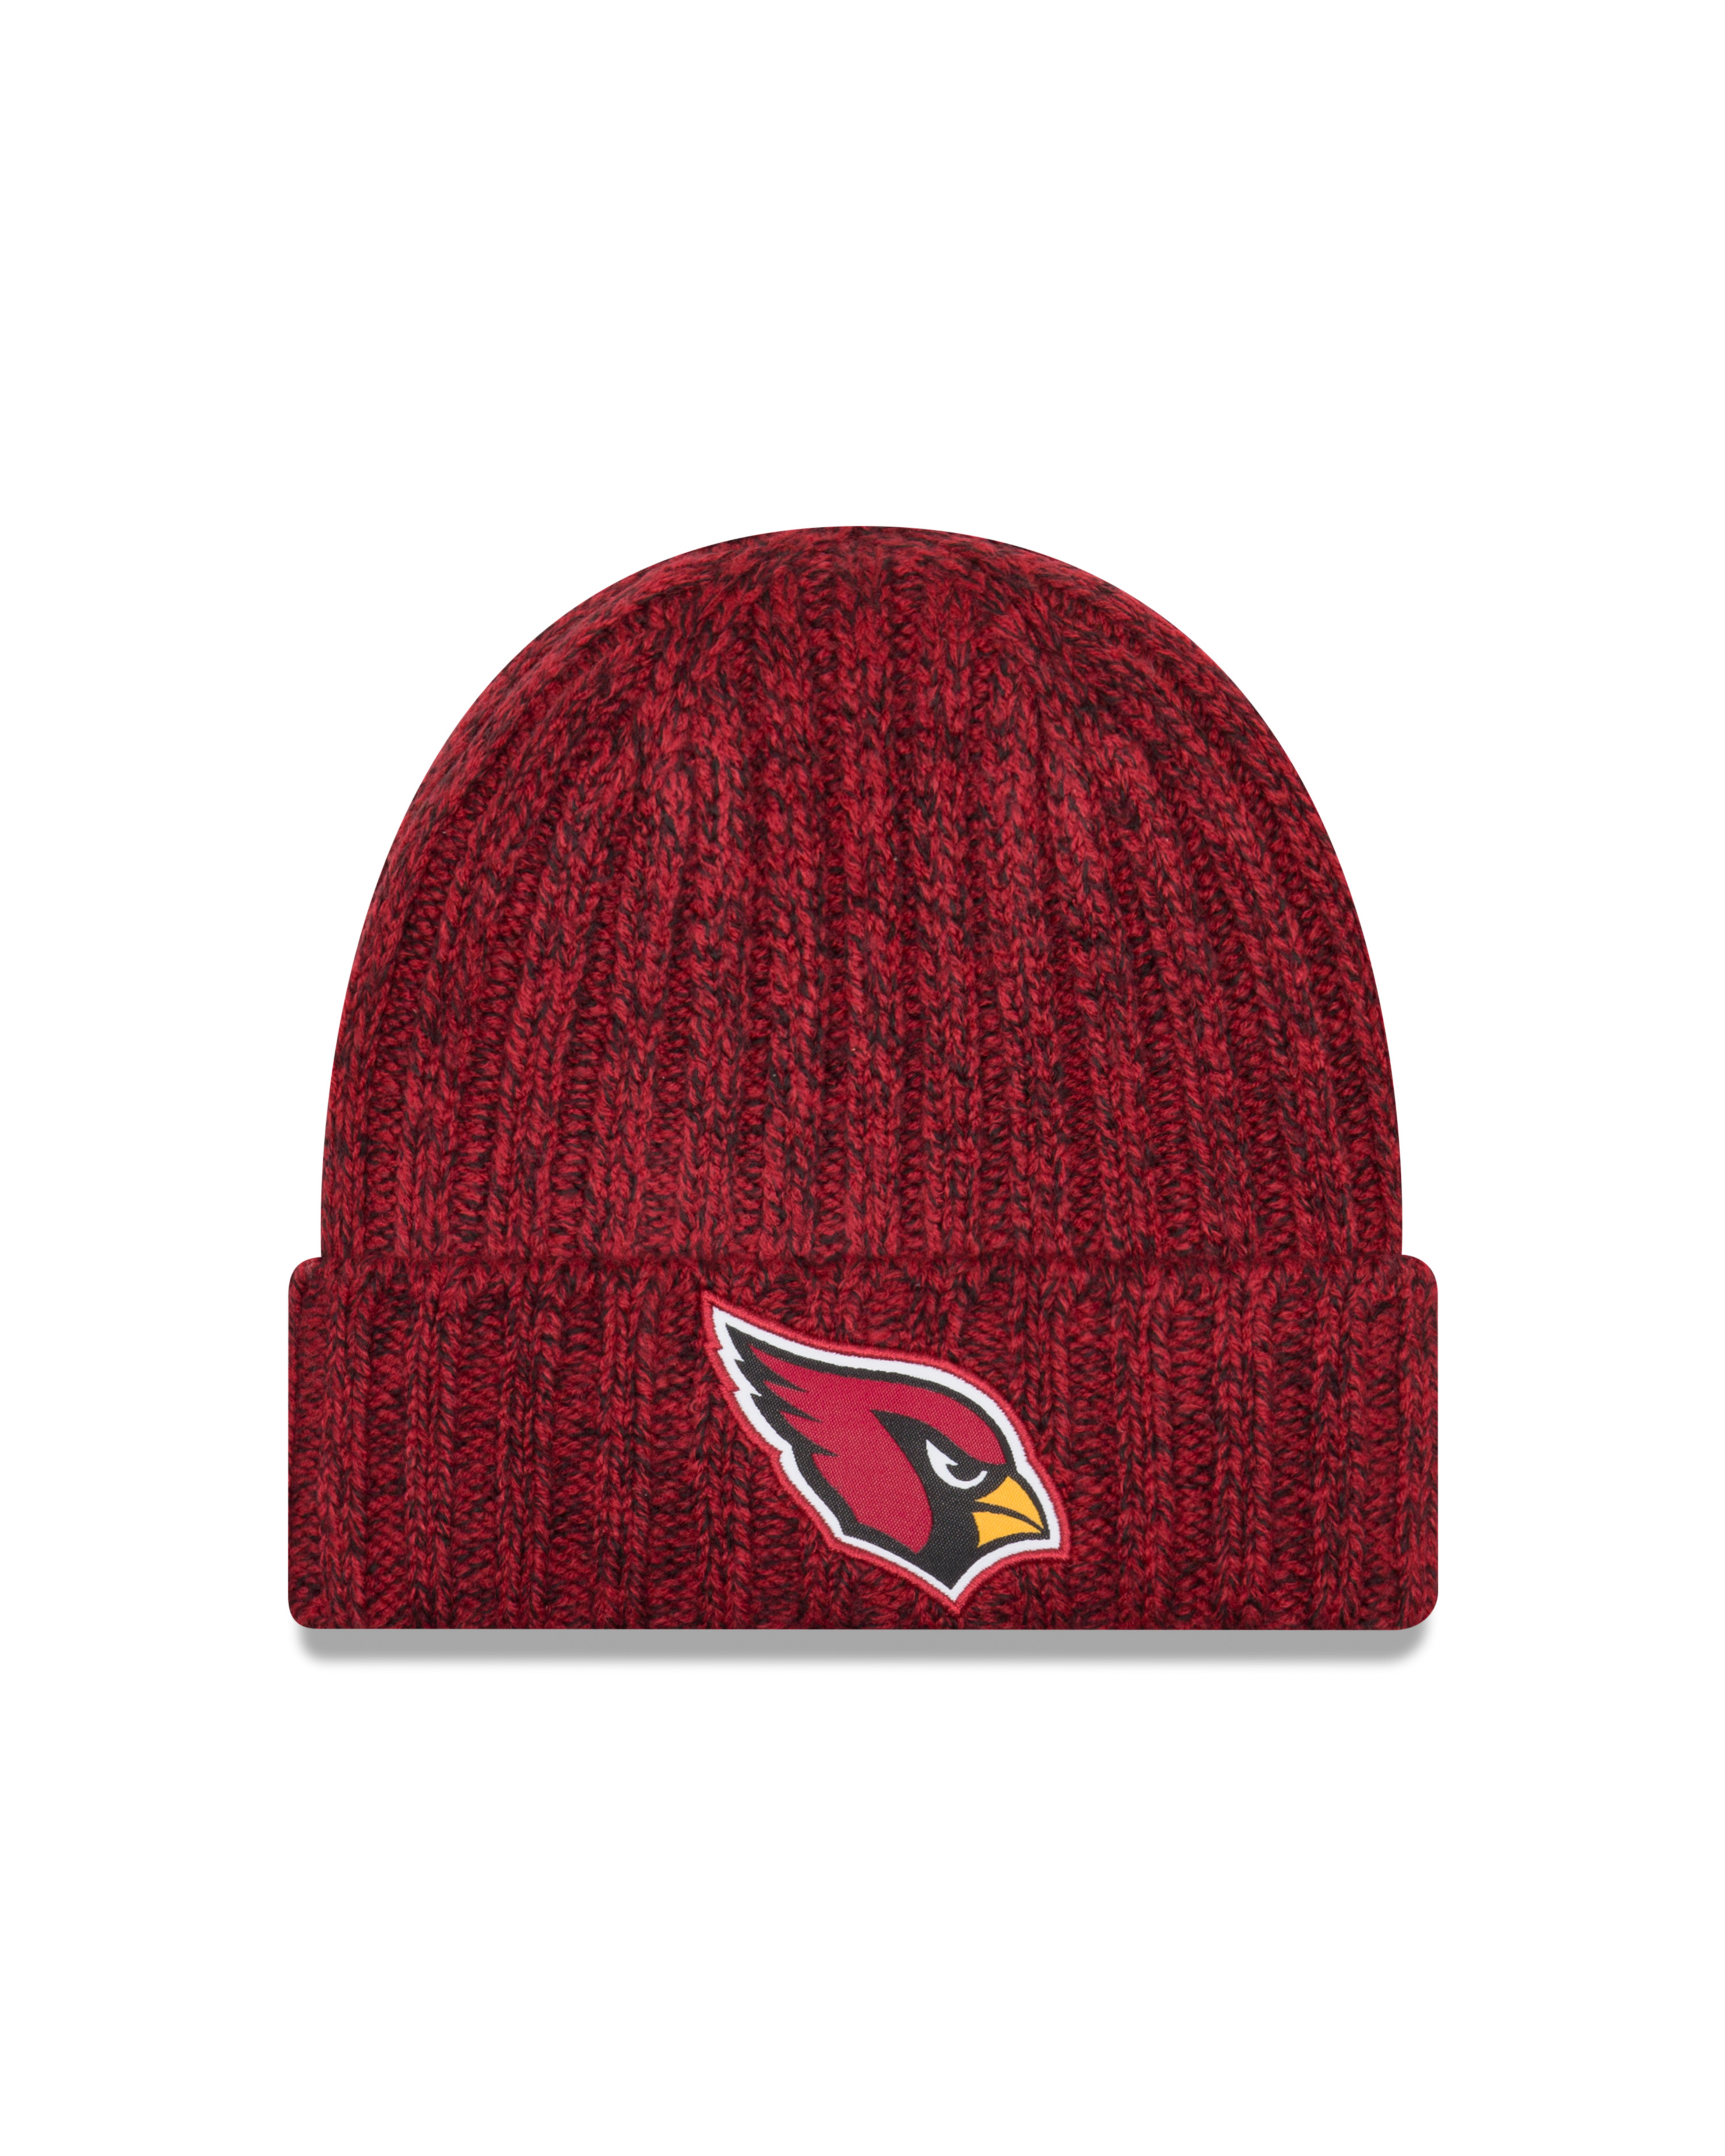 New Era Official NFL Cold Weather Collection #94